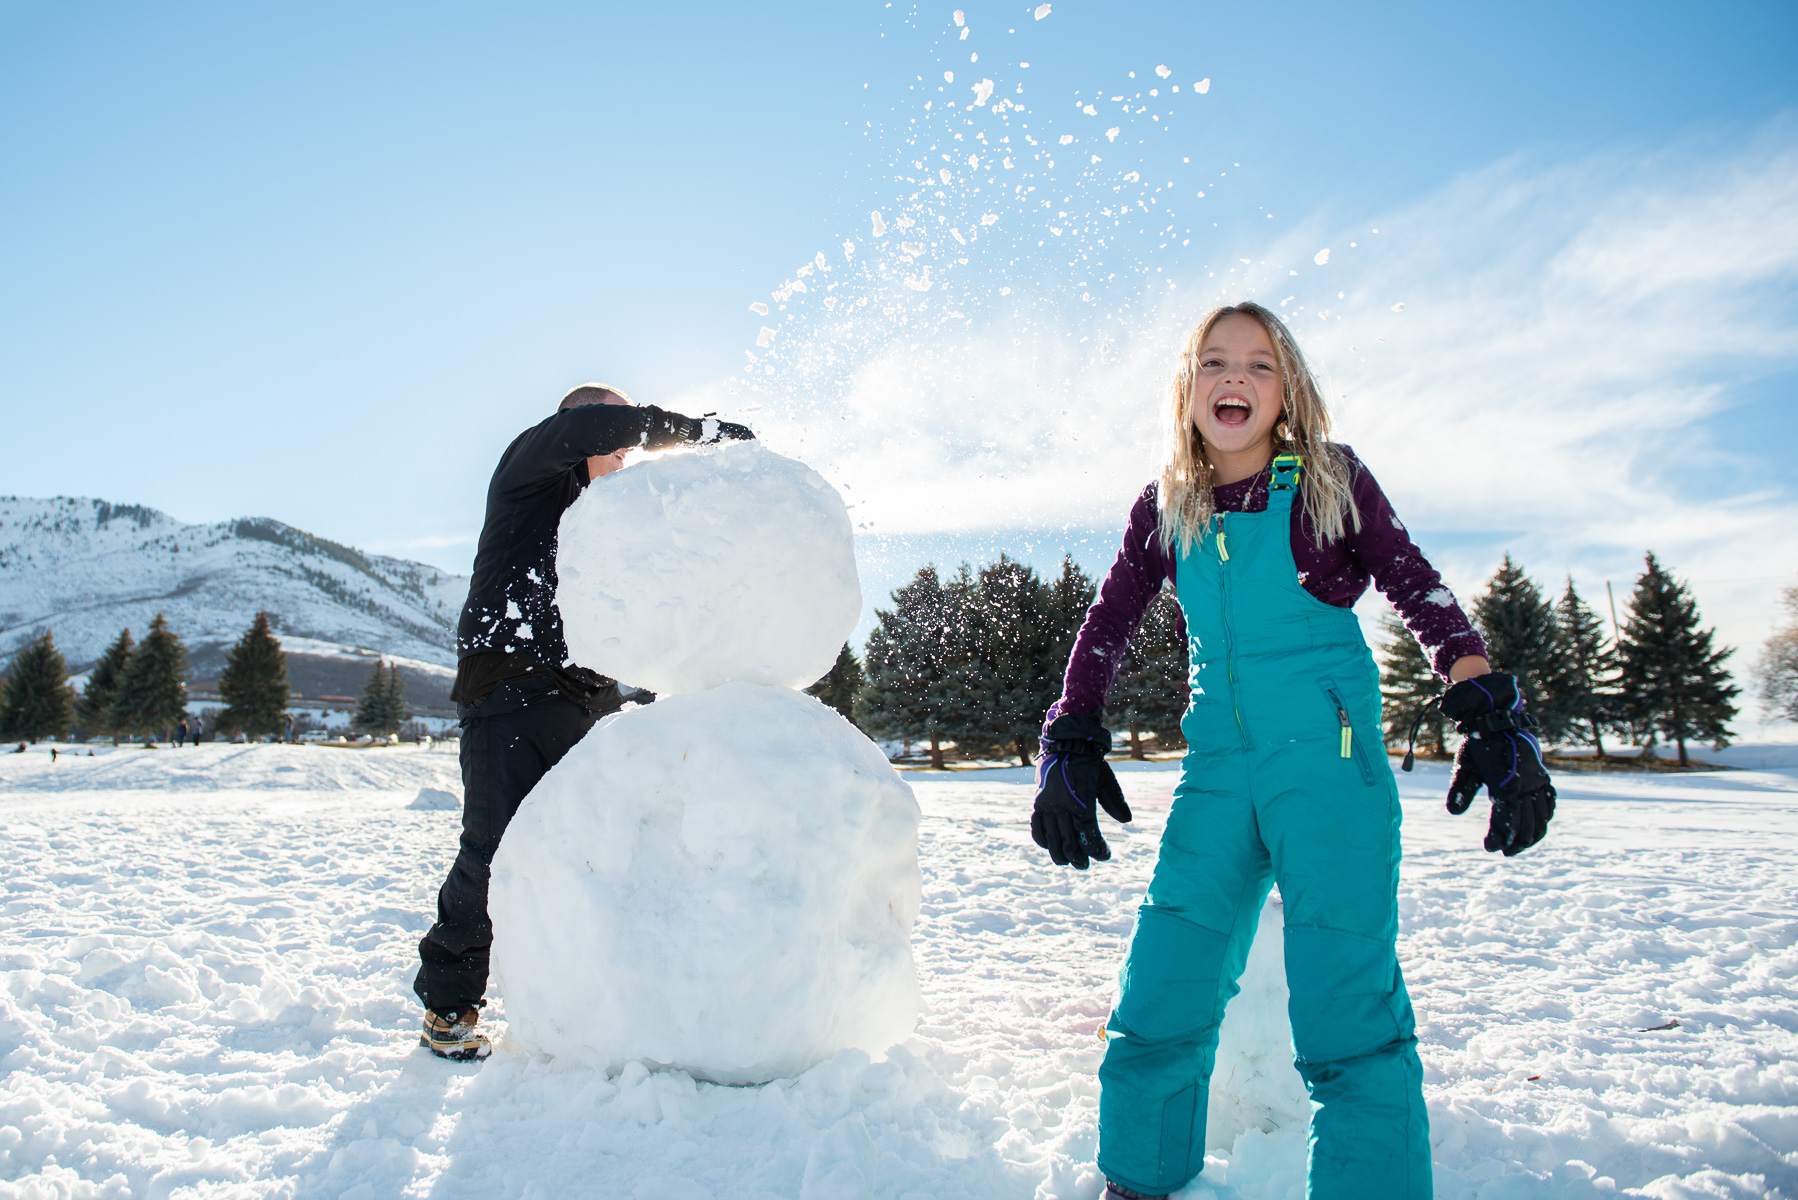 Snow flies over young girl from top of snowman